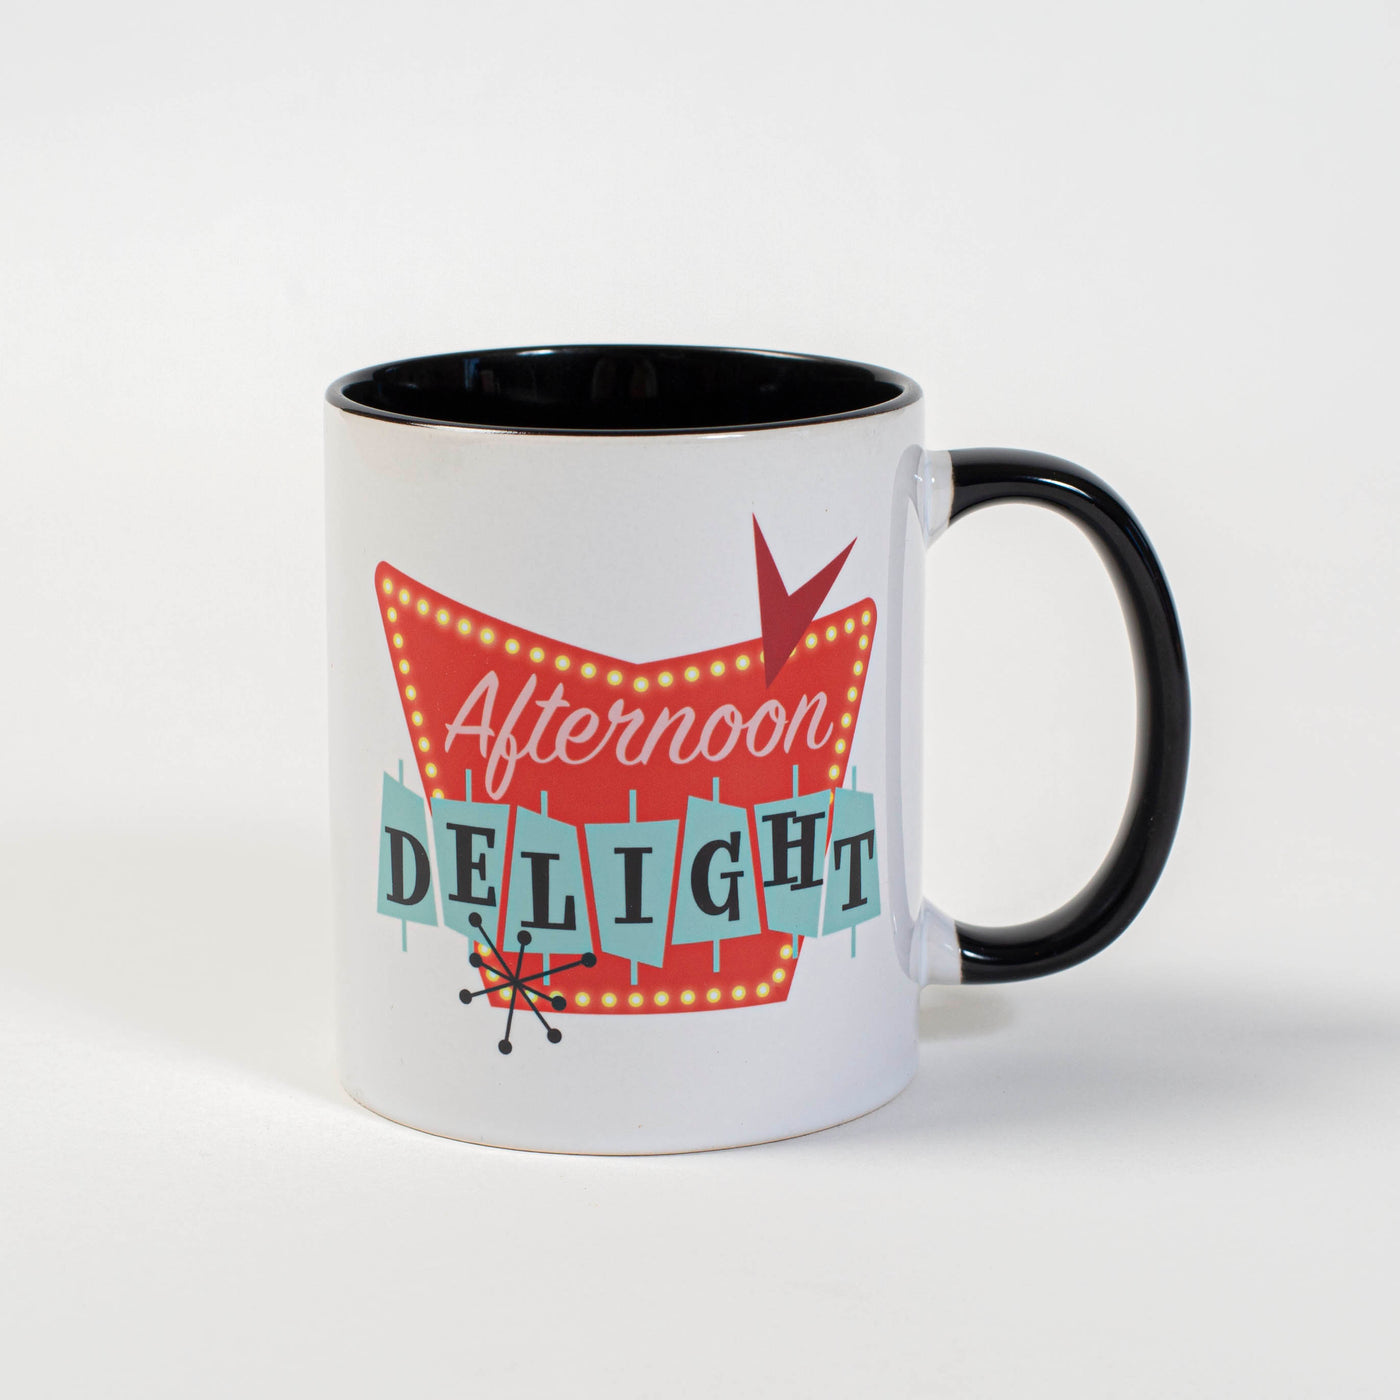 This 11oz coffee mug lets you enjoy your favorite beverage in vintage style. The contrasting interior and handle give it a nostalgic look, while the "Afternoon Delight" text pays homage to the retro look. Start your day with a cup of coffee and a reminder of simpler times.